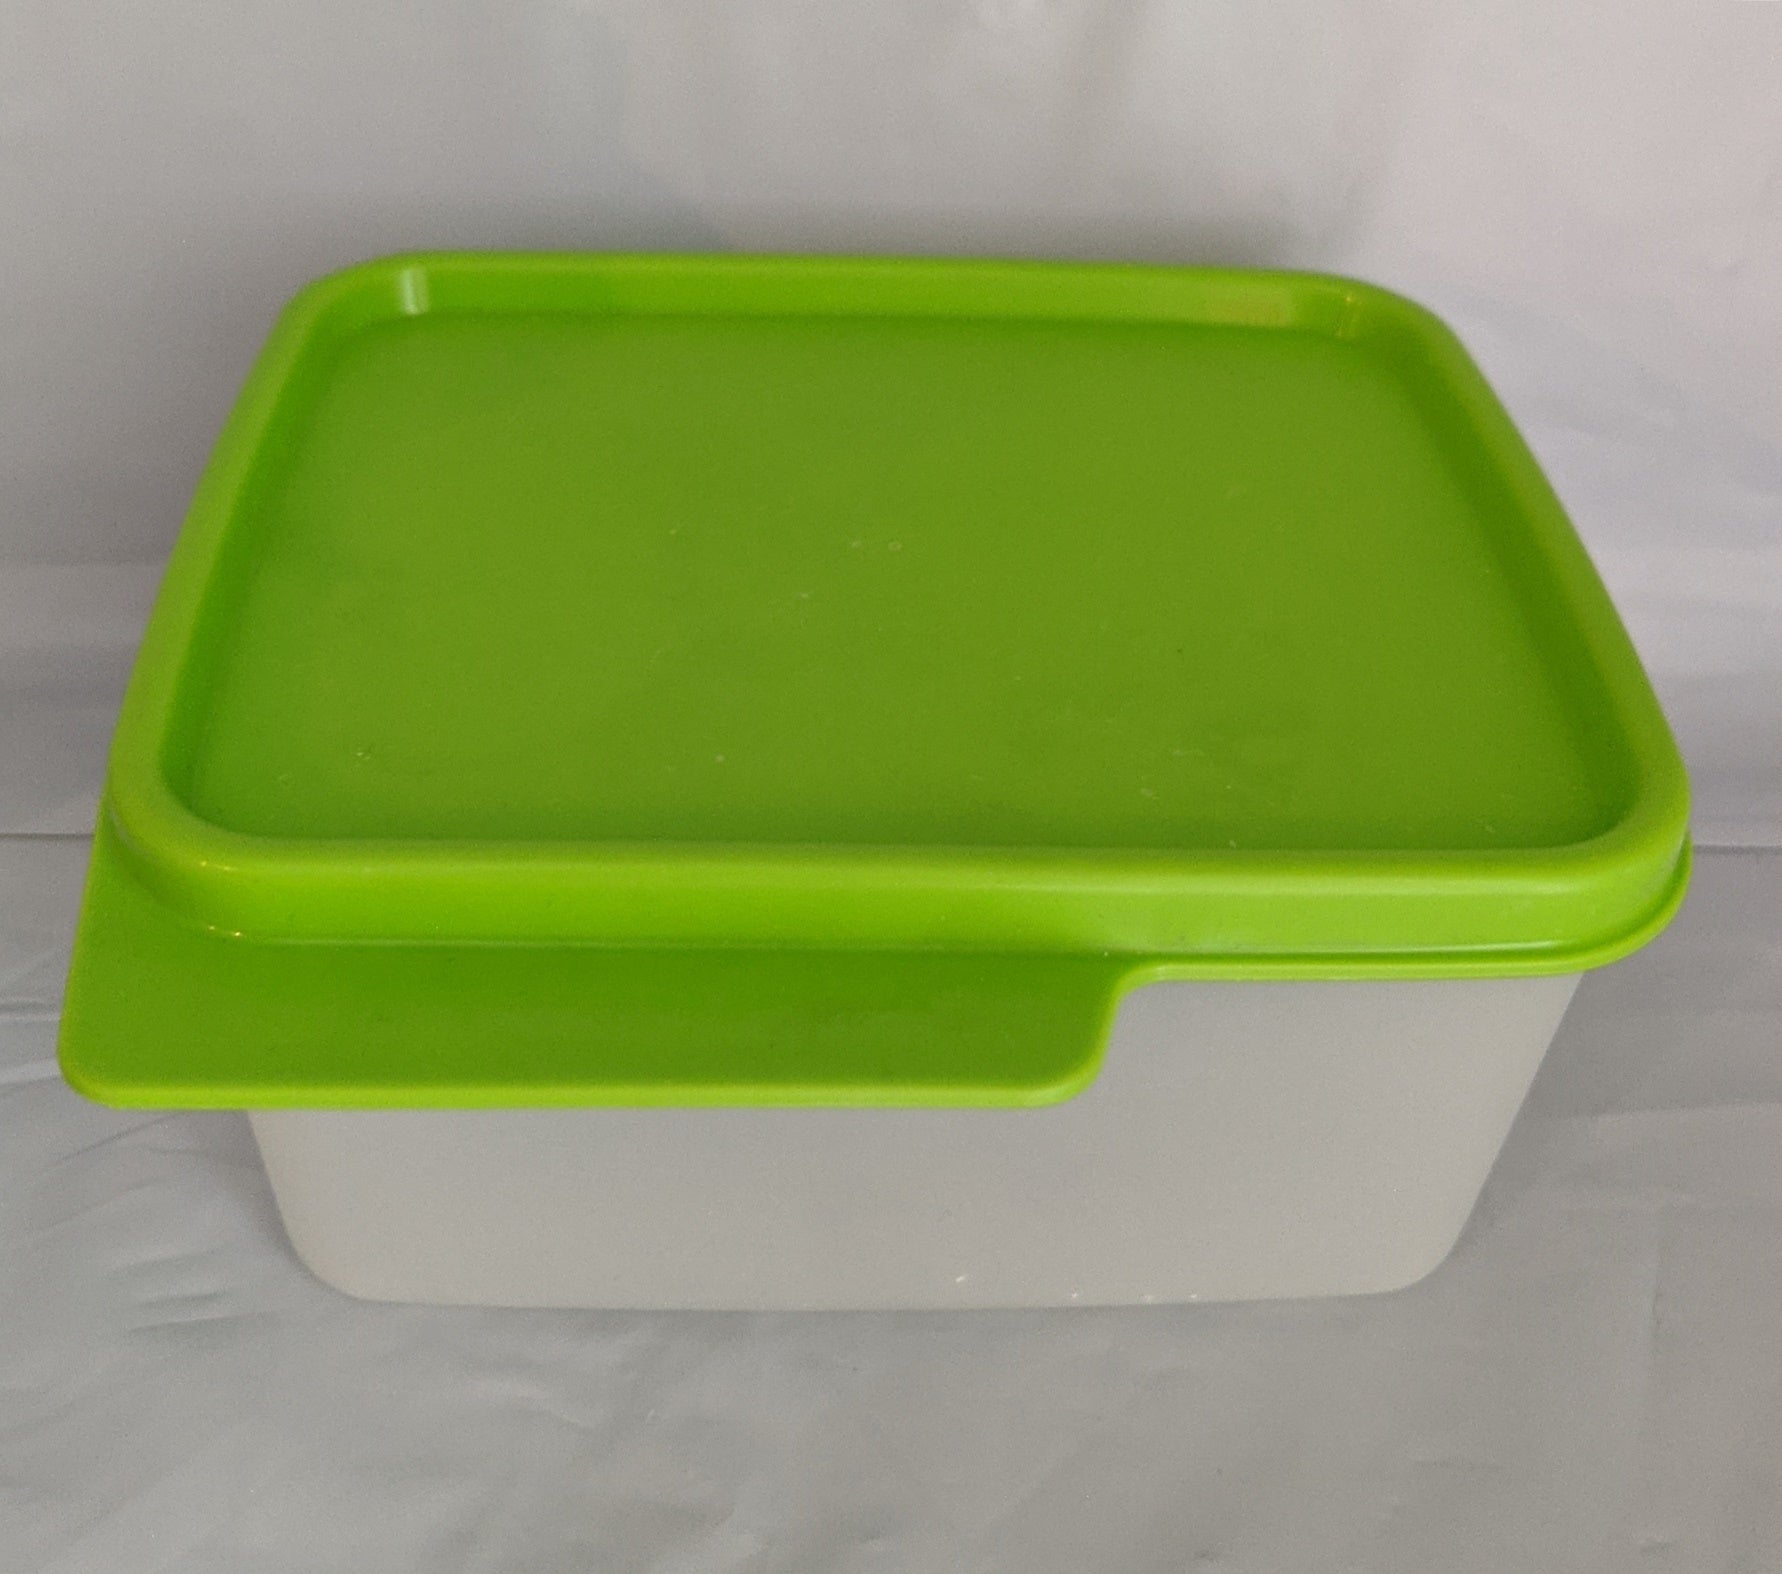 TUPPERWARE 1 SMALL KEEP TABS STORAGE KEEPER CONTAINER w/ LIME